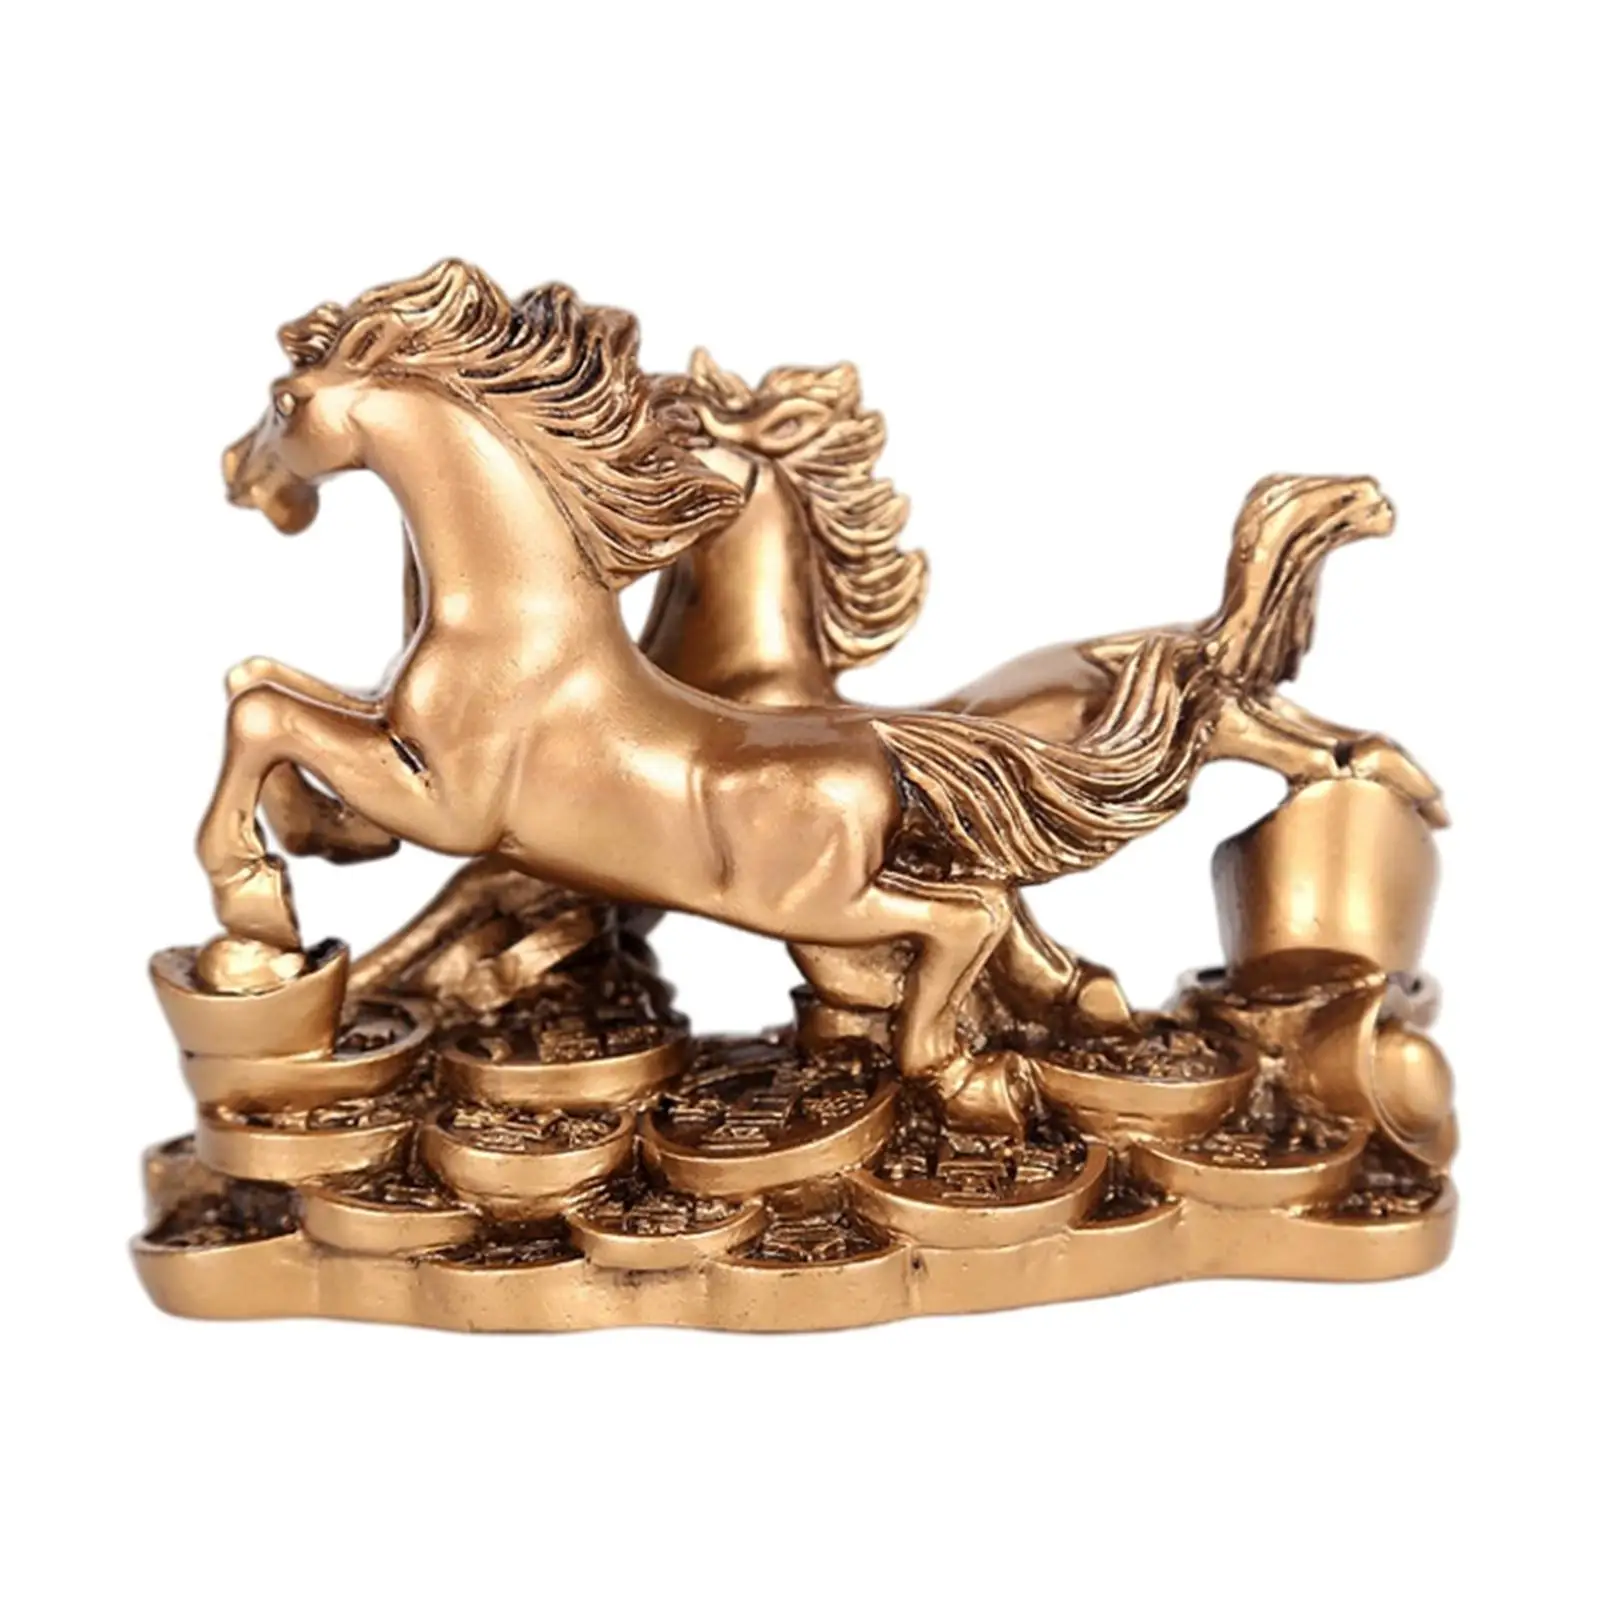 Running Two Horses Statue Sculpture Decorative Figurine Collectible Feng Shui Two Galloping Horses Statue for Indoor Decoration